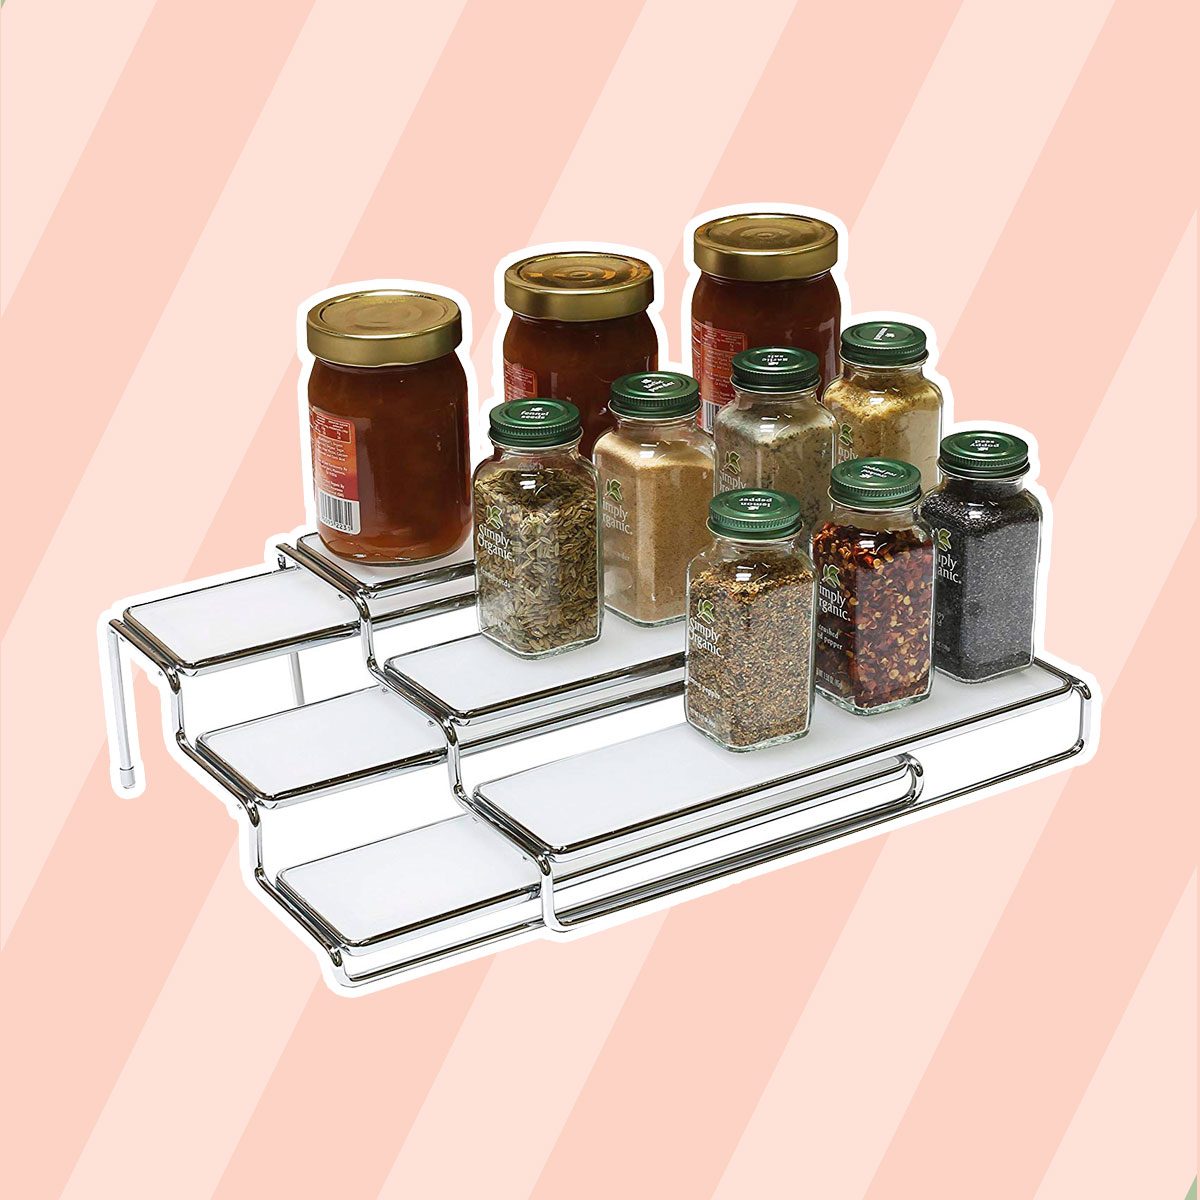 Tiered spice rack